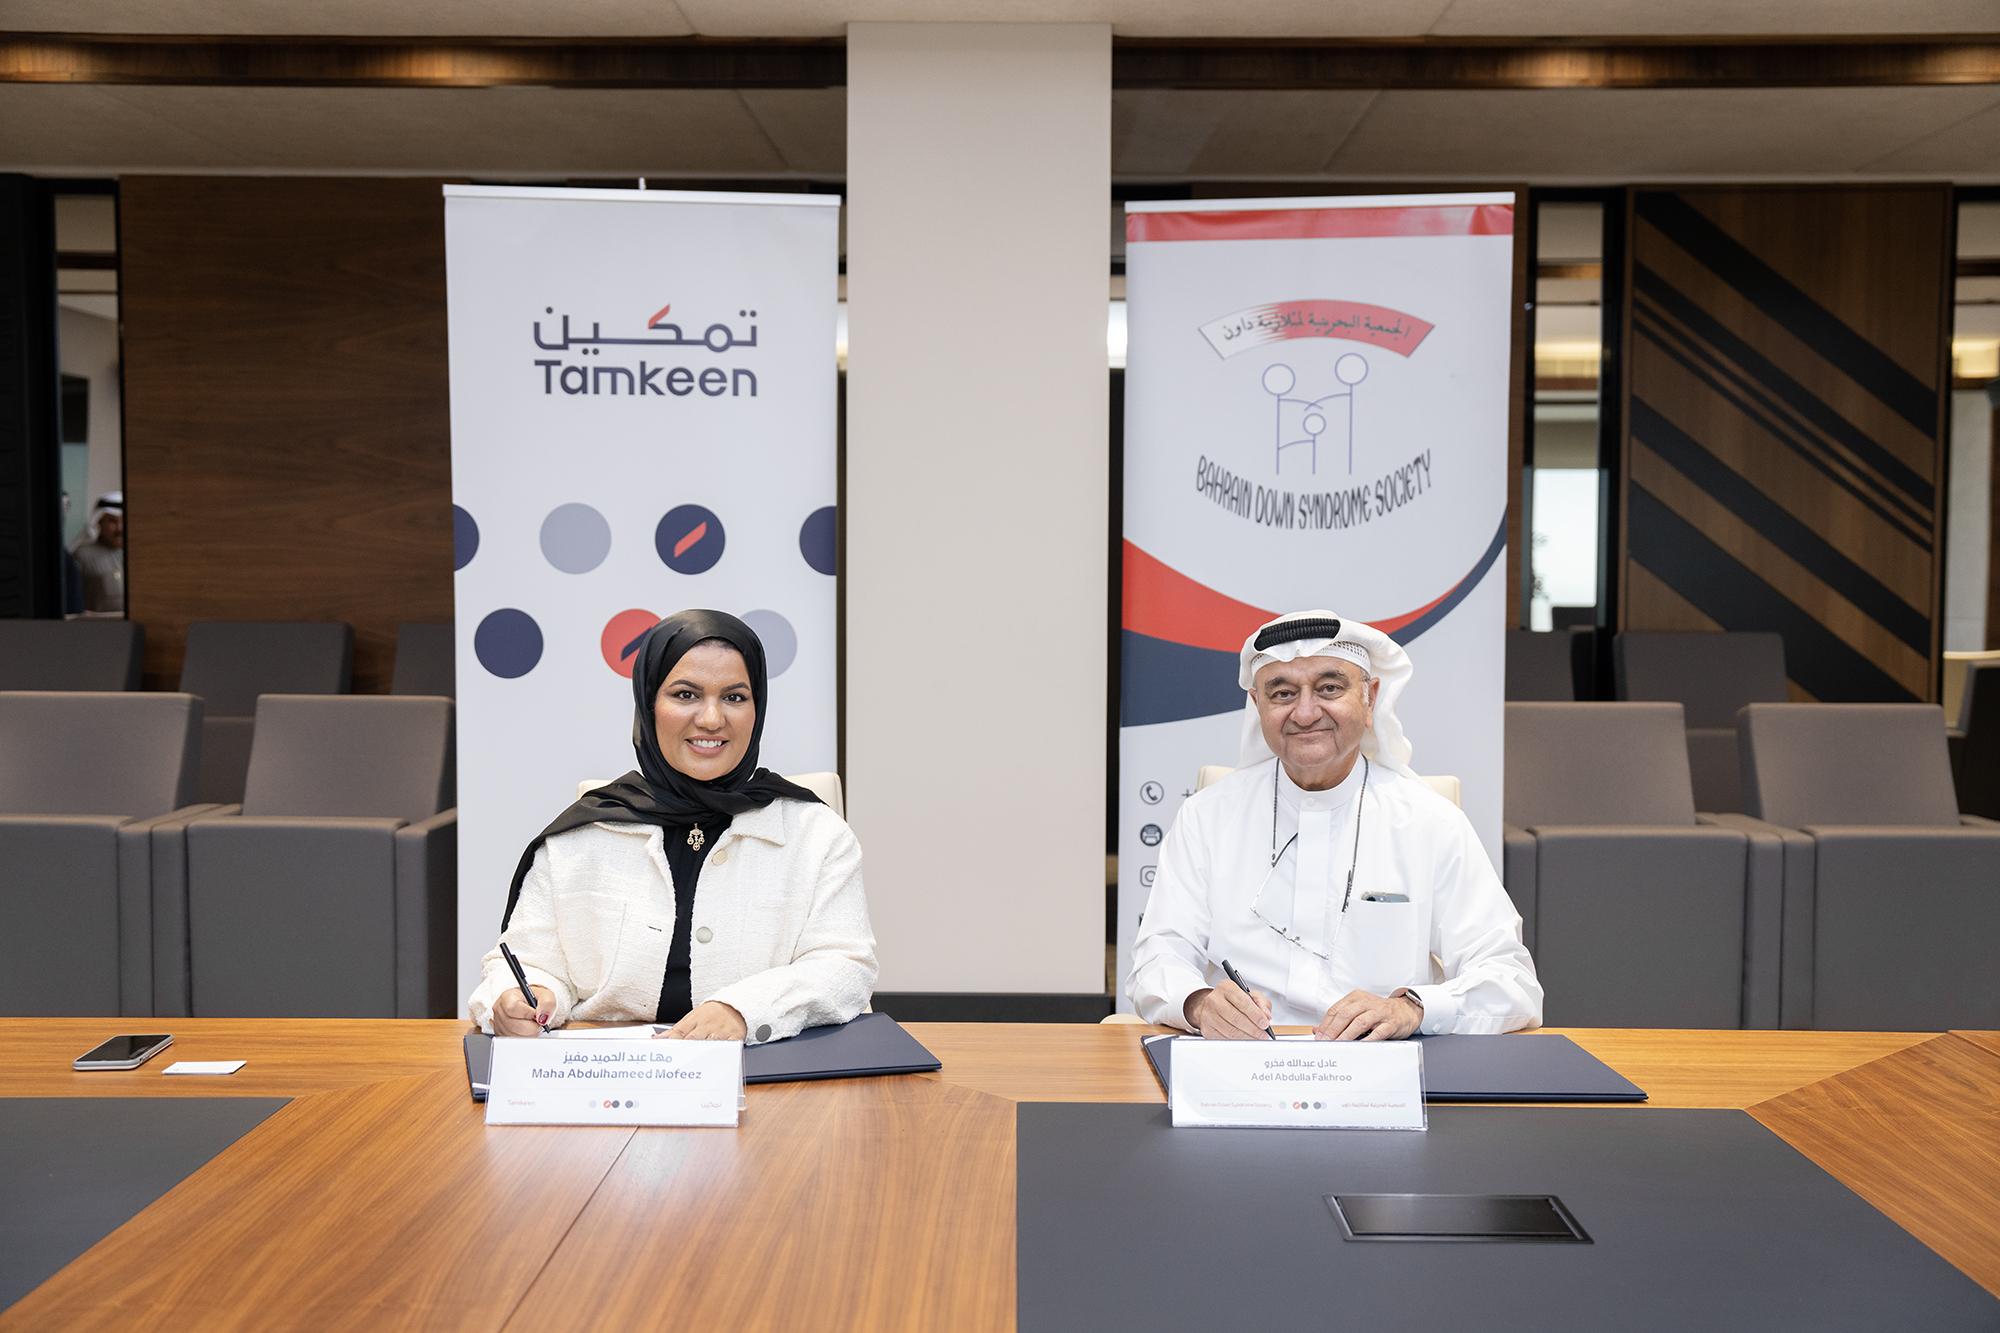 Tamkeen renews its cooperation with the Bahrain Down Syndrome Society to train and employ Bahraini students through the Train and Place Program